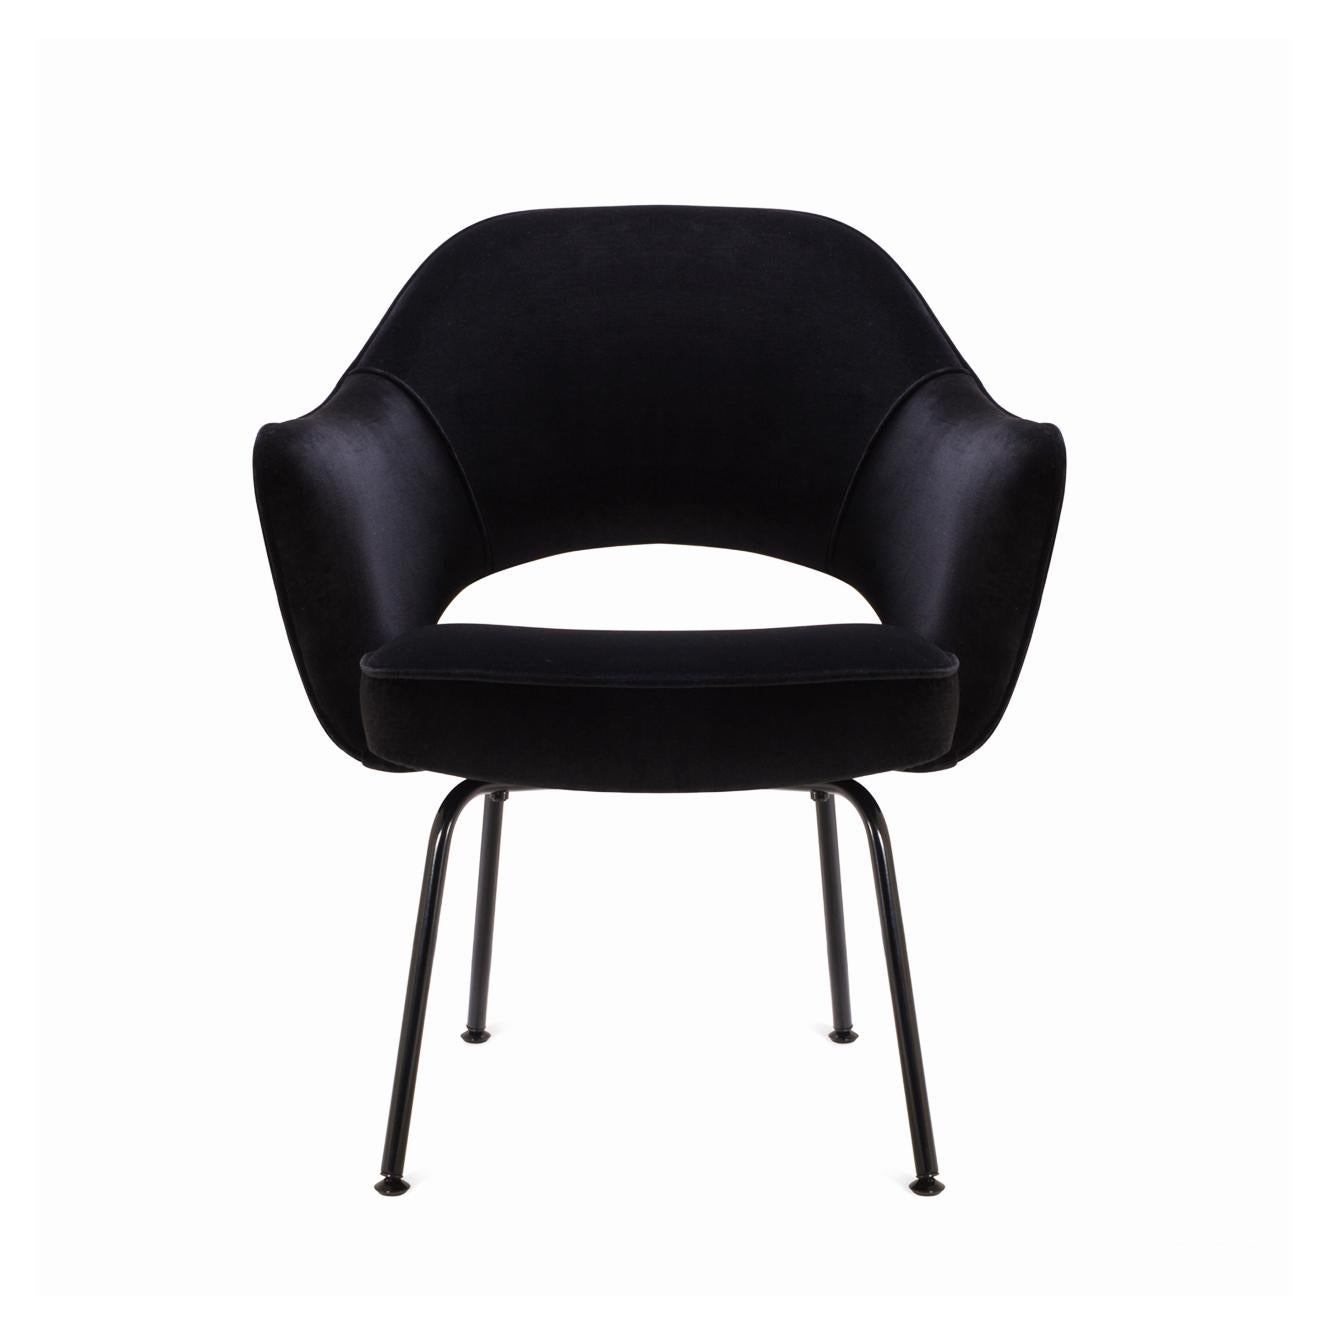 The mid-century Classic vintage Eero Saarinen Executive Armchair, manufactured by Knoll Furniture and custom upholstered in a deep 100% cotton Italian Velvet in glamorous Black. All restoration is executed in line with original specifications. Steel